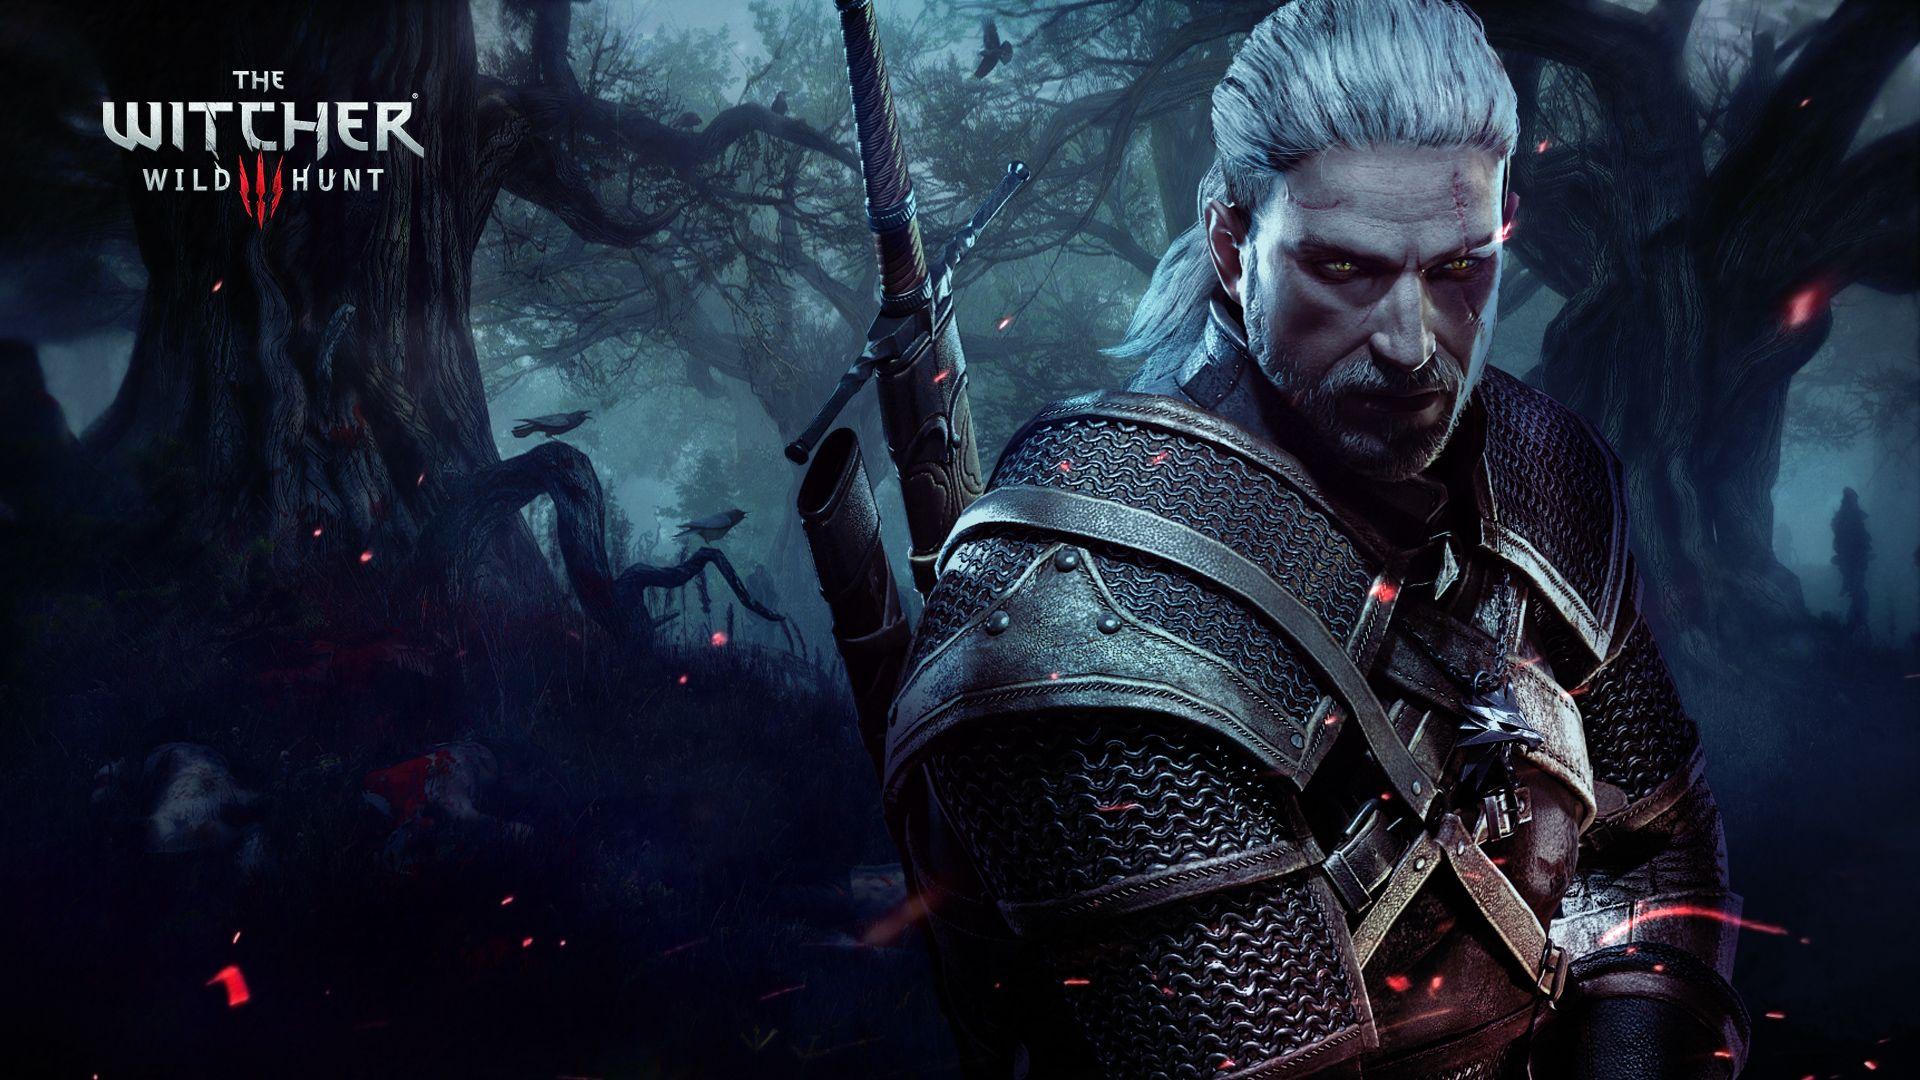 The Witcher 3 Wallpaper 47277 1920x1080 px